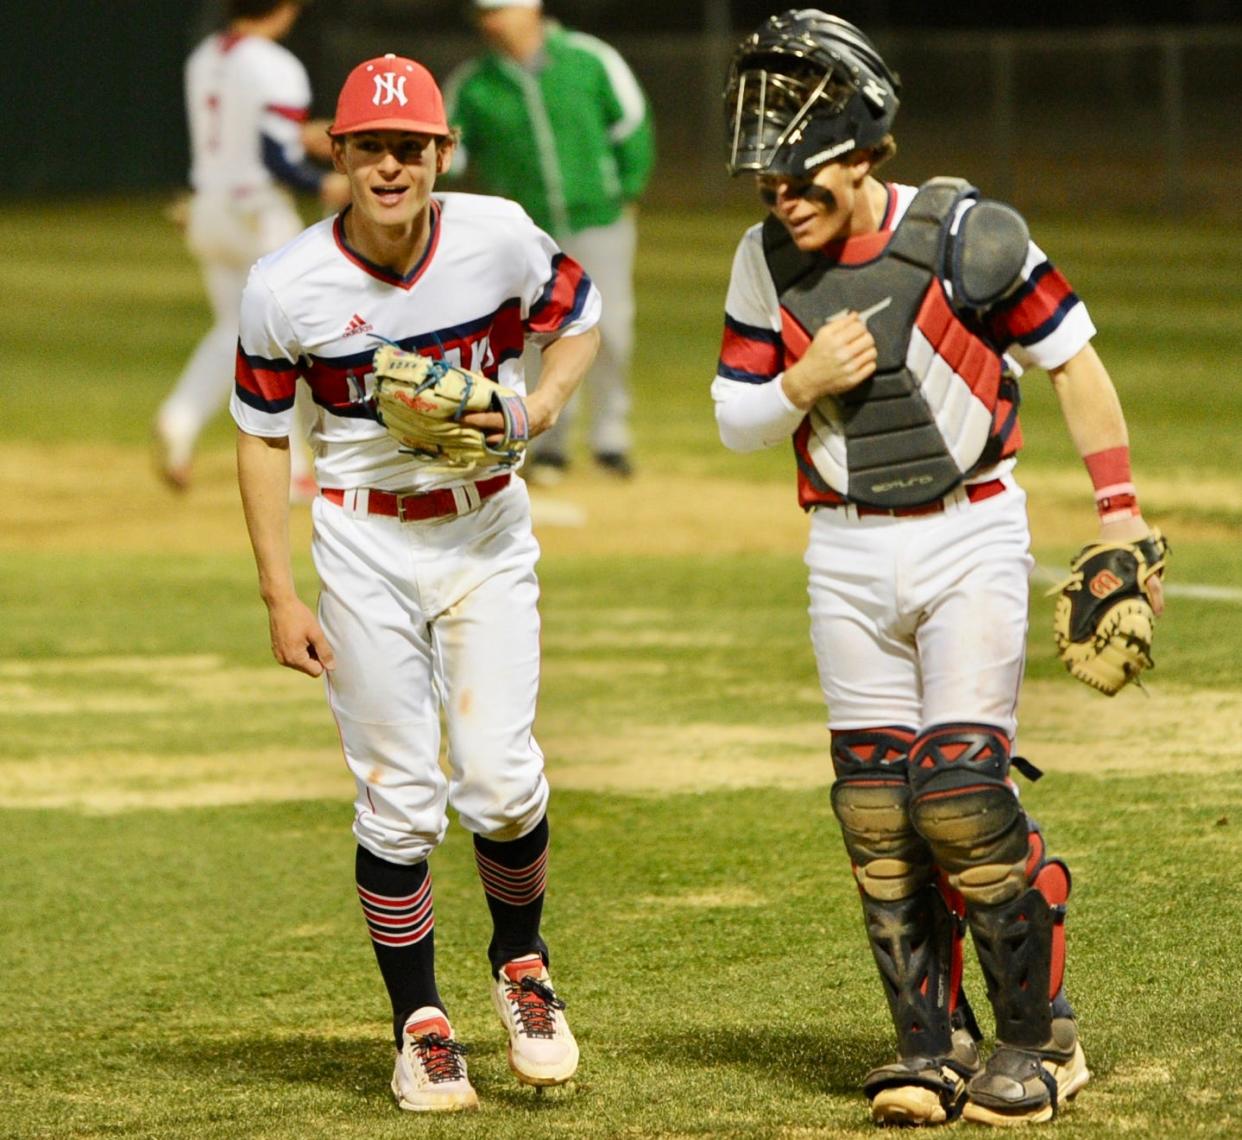 Jim Ned pitcher Blaine Palmer celebrates with catcher Braden Lewis after beating Wall 7-0 on Thursday.